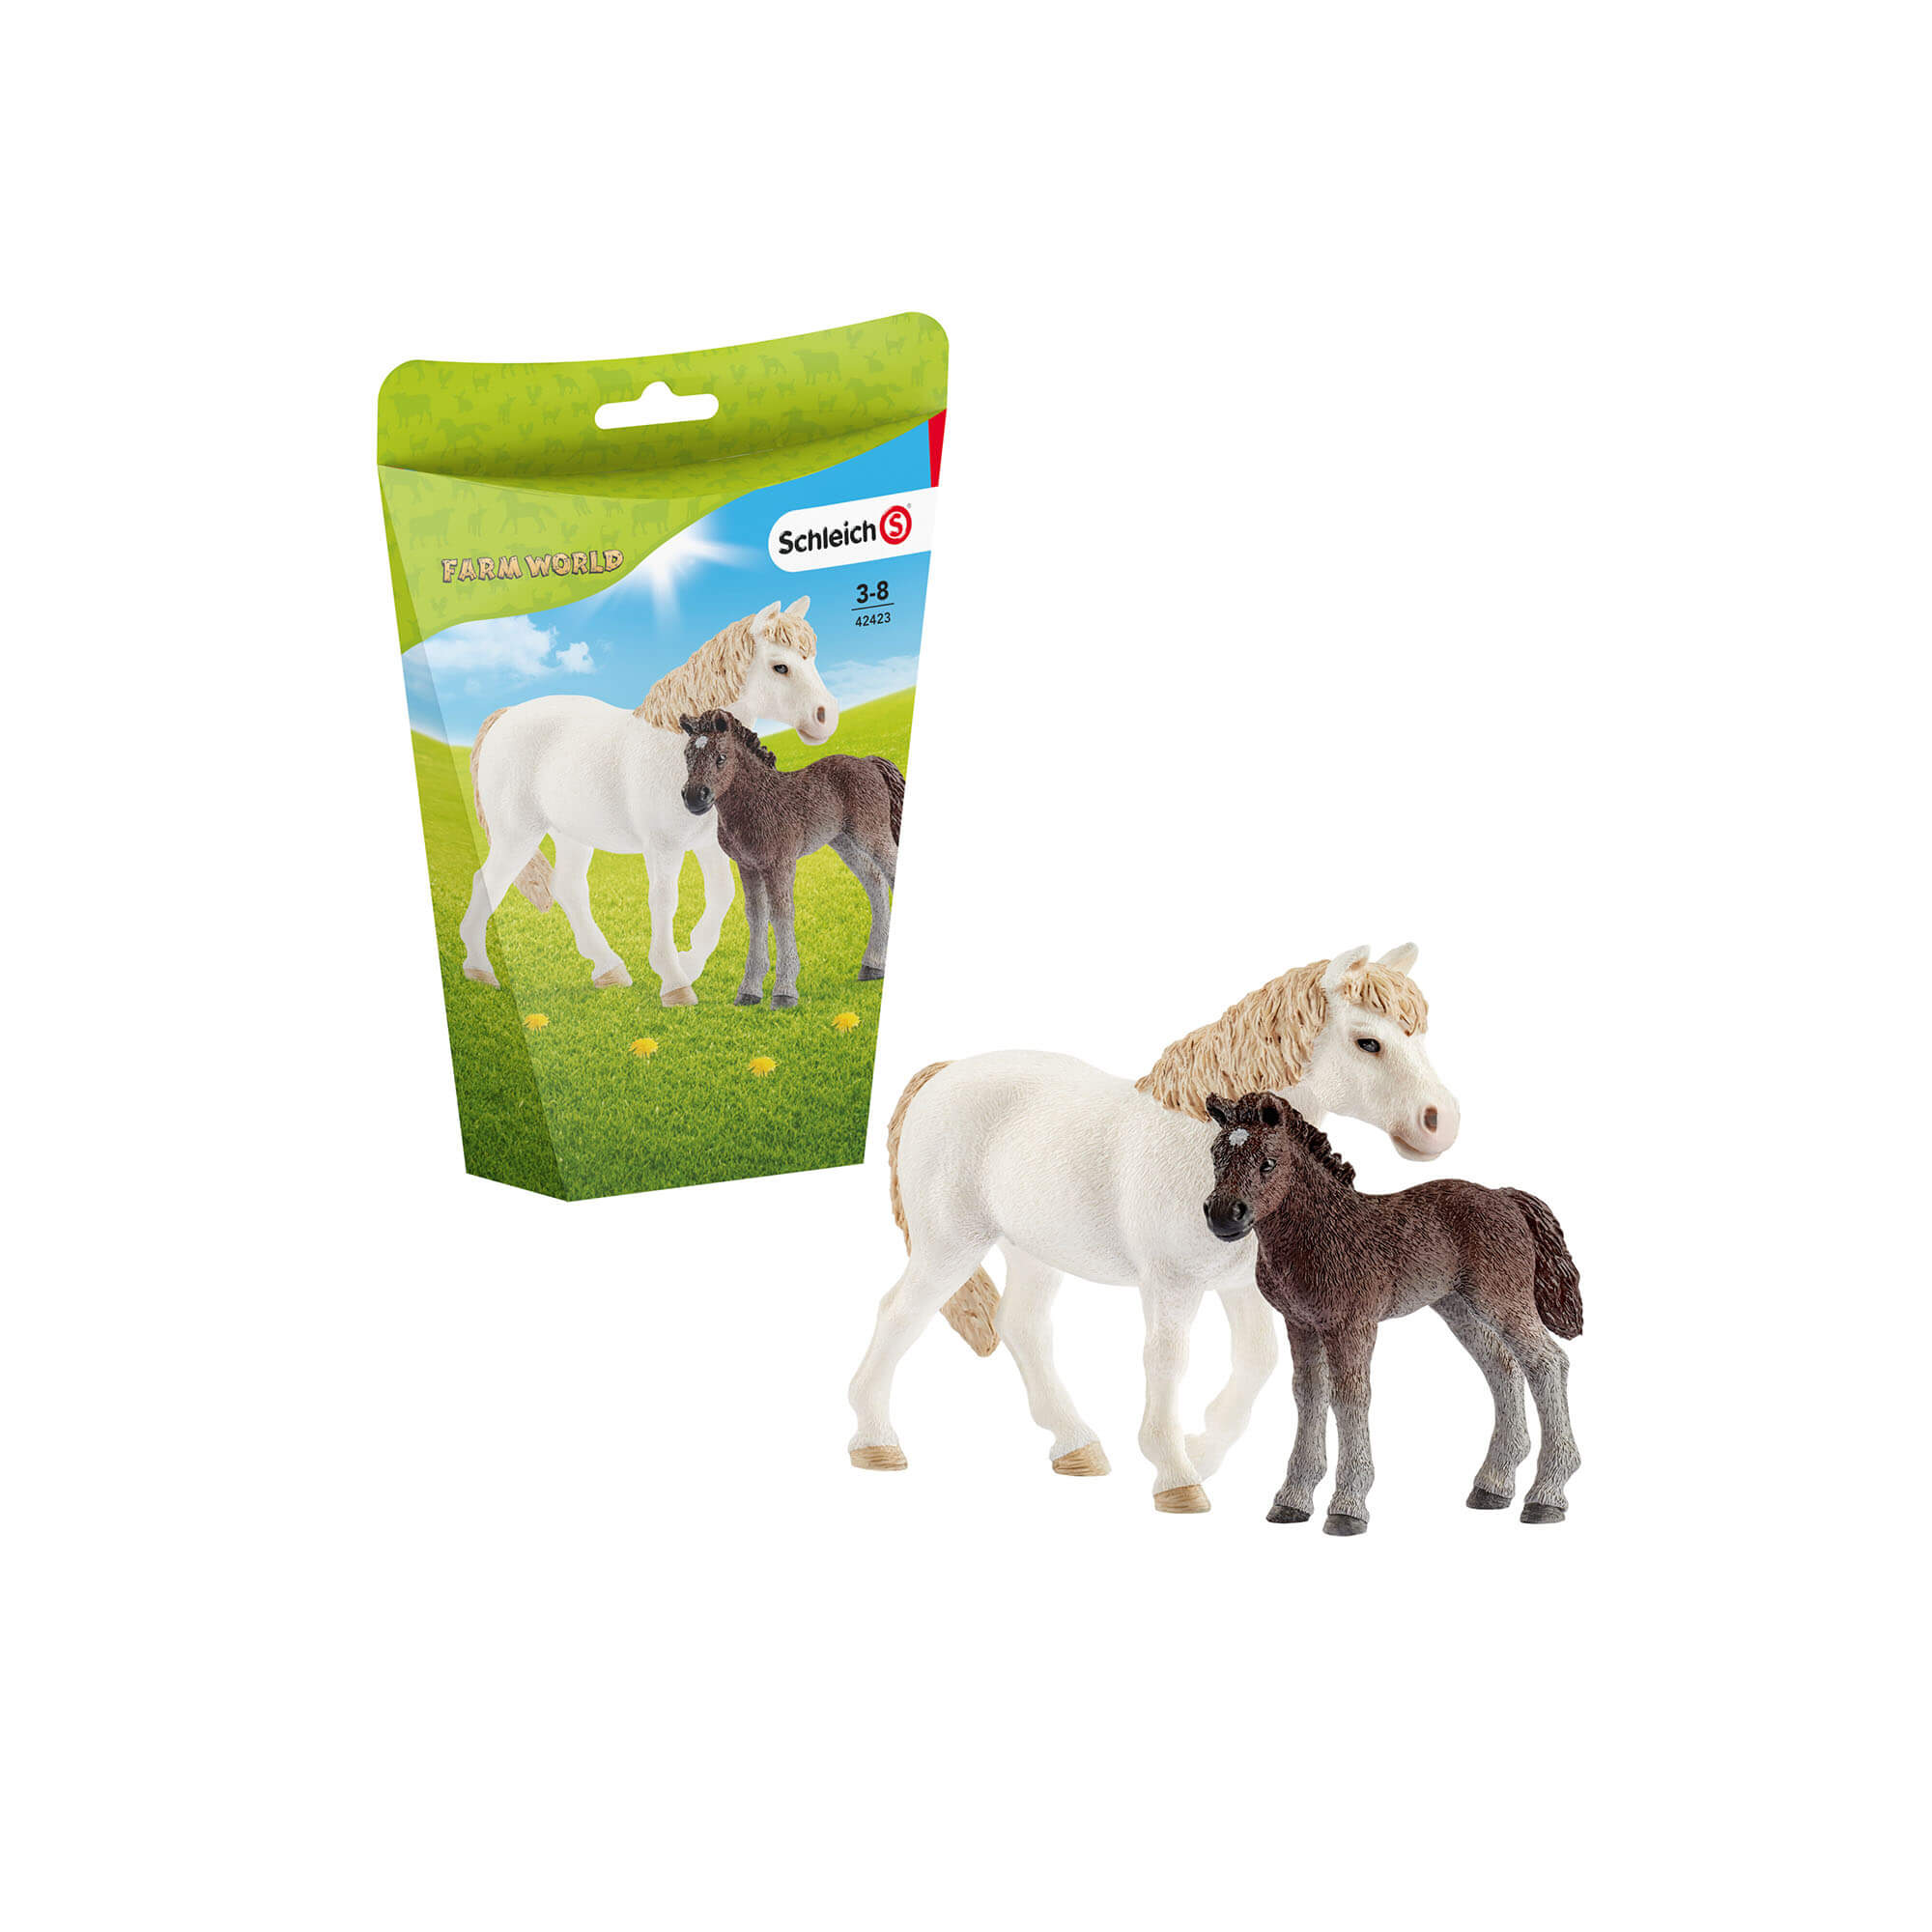 Schleich Farm World Pony Mare And Foal Play Set